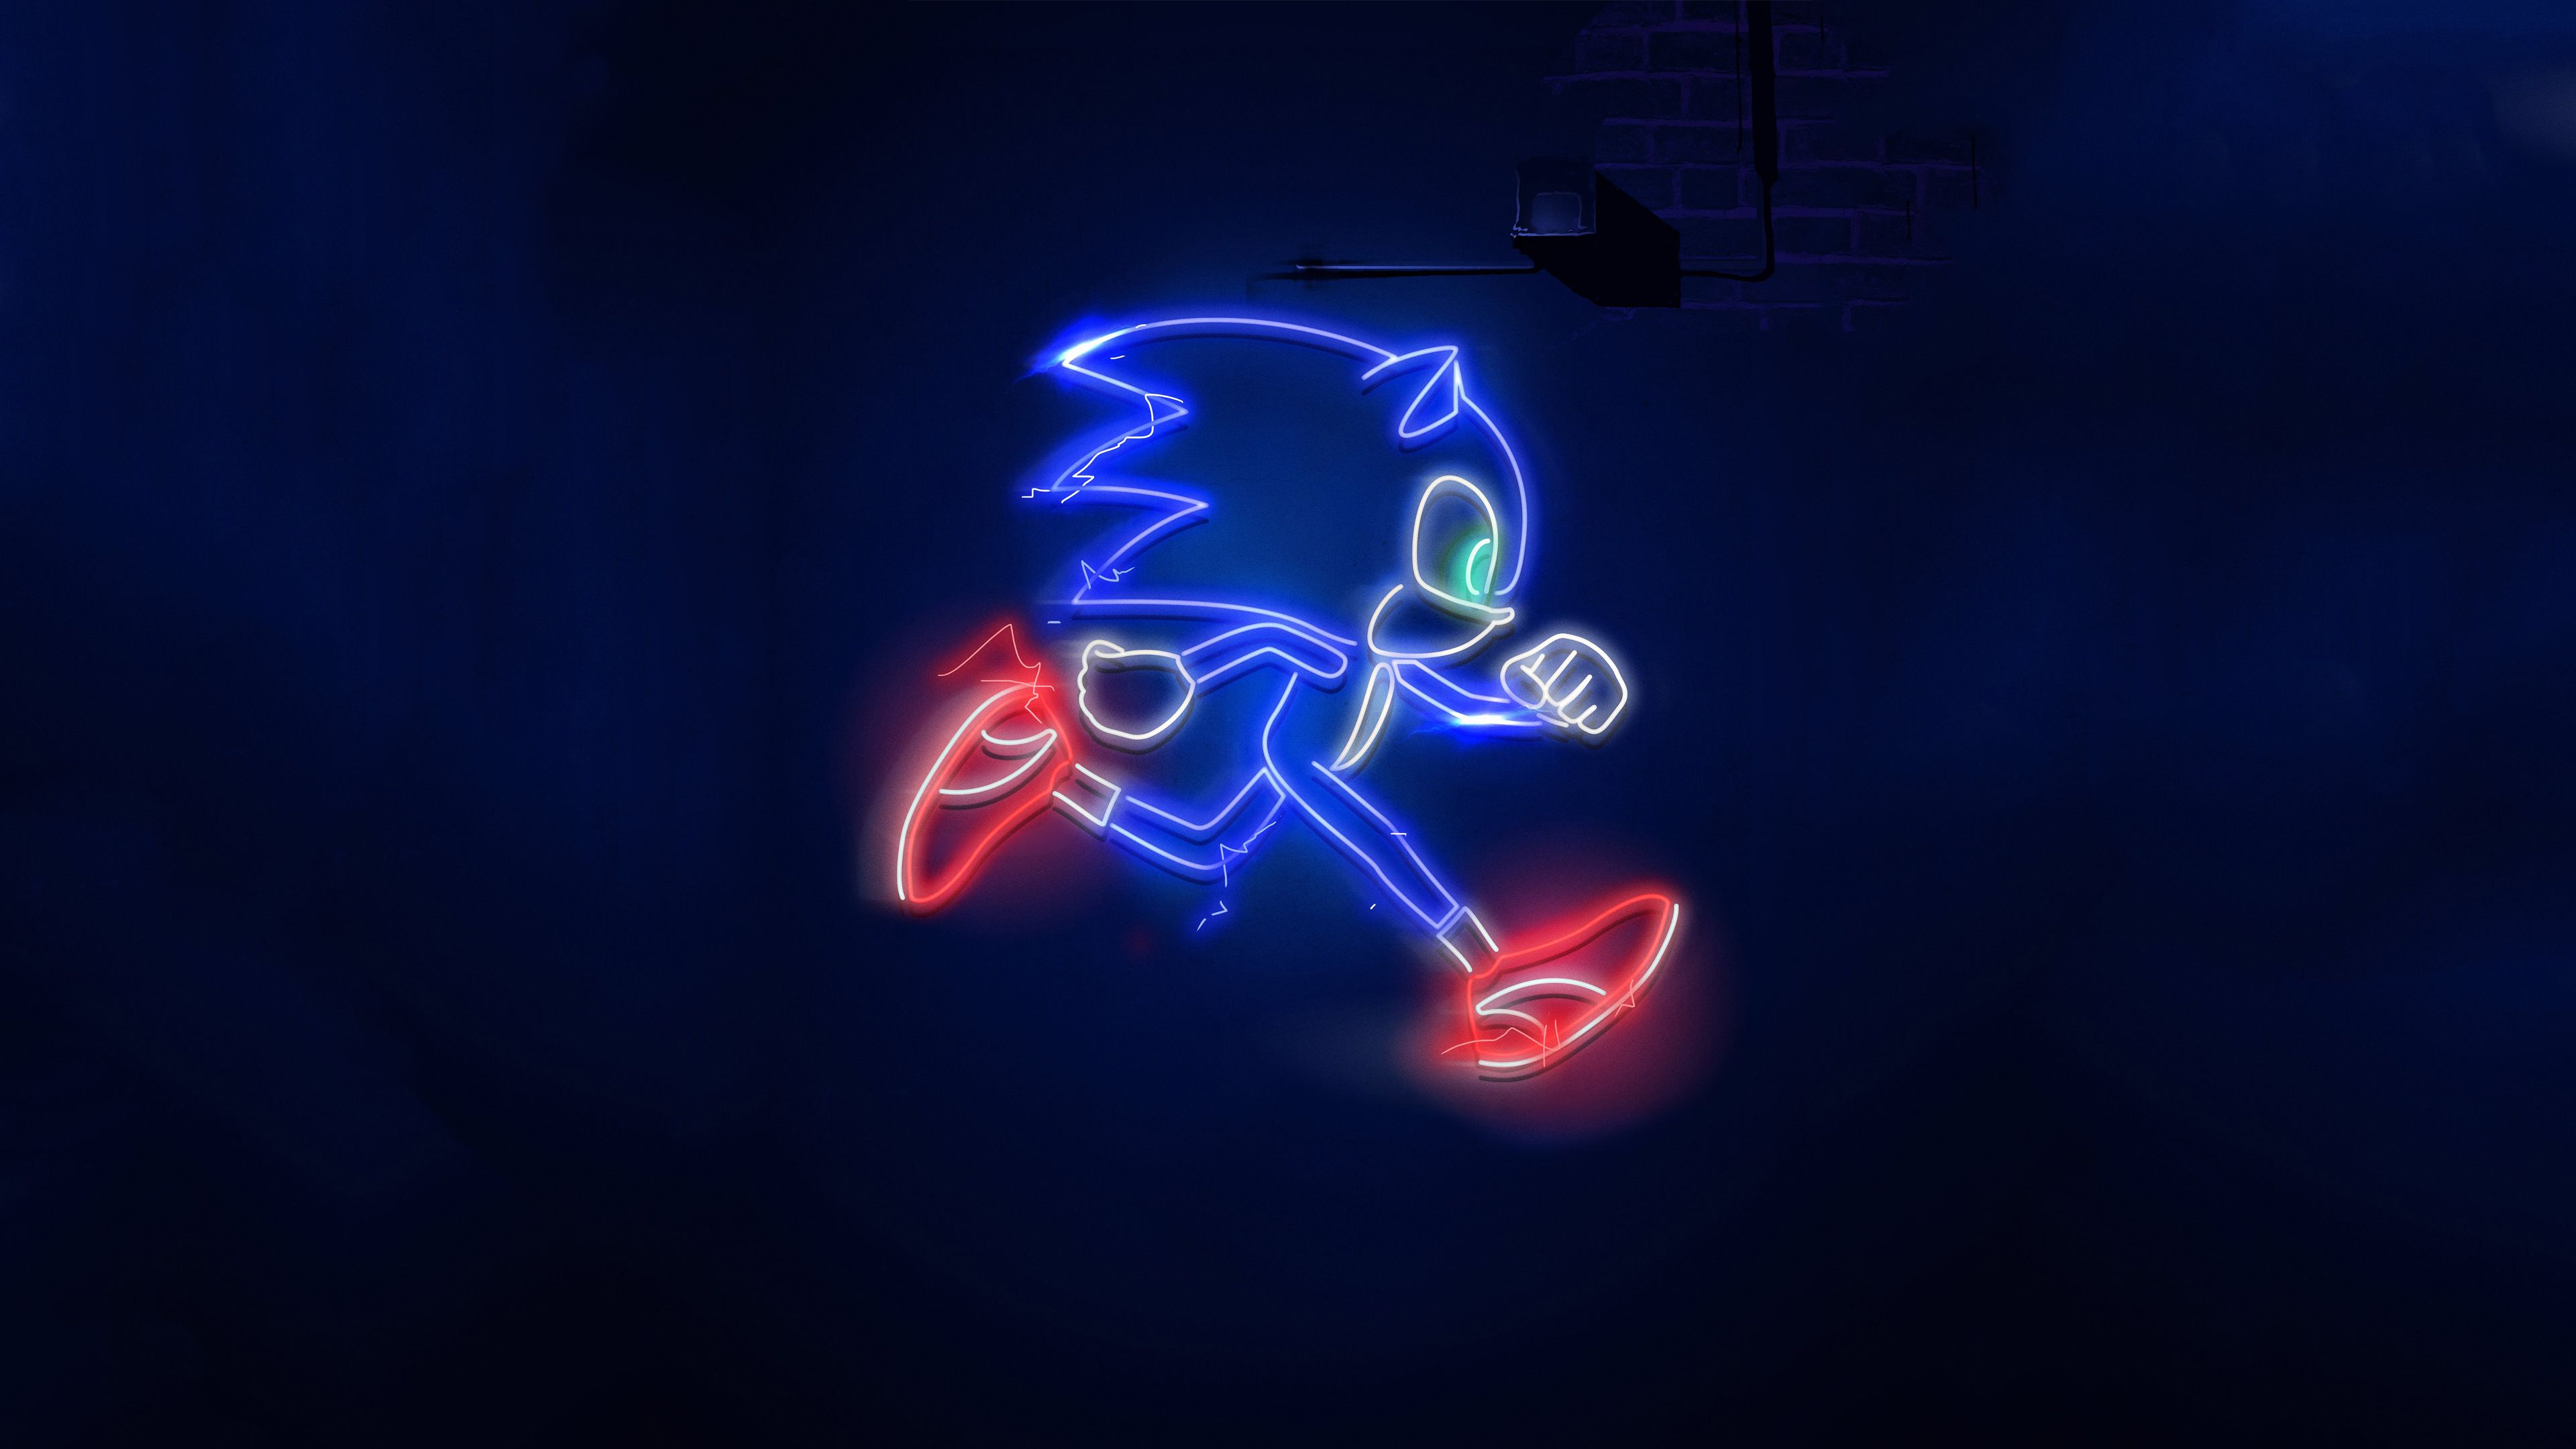 Sonic the Hedgehog Neon Sign 4k Ultra HD Wallpaper. Background